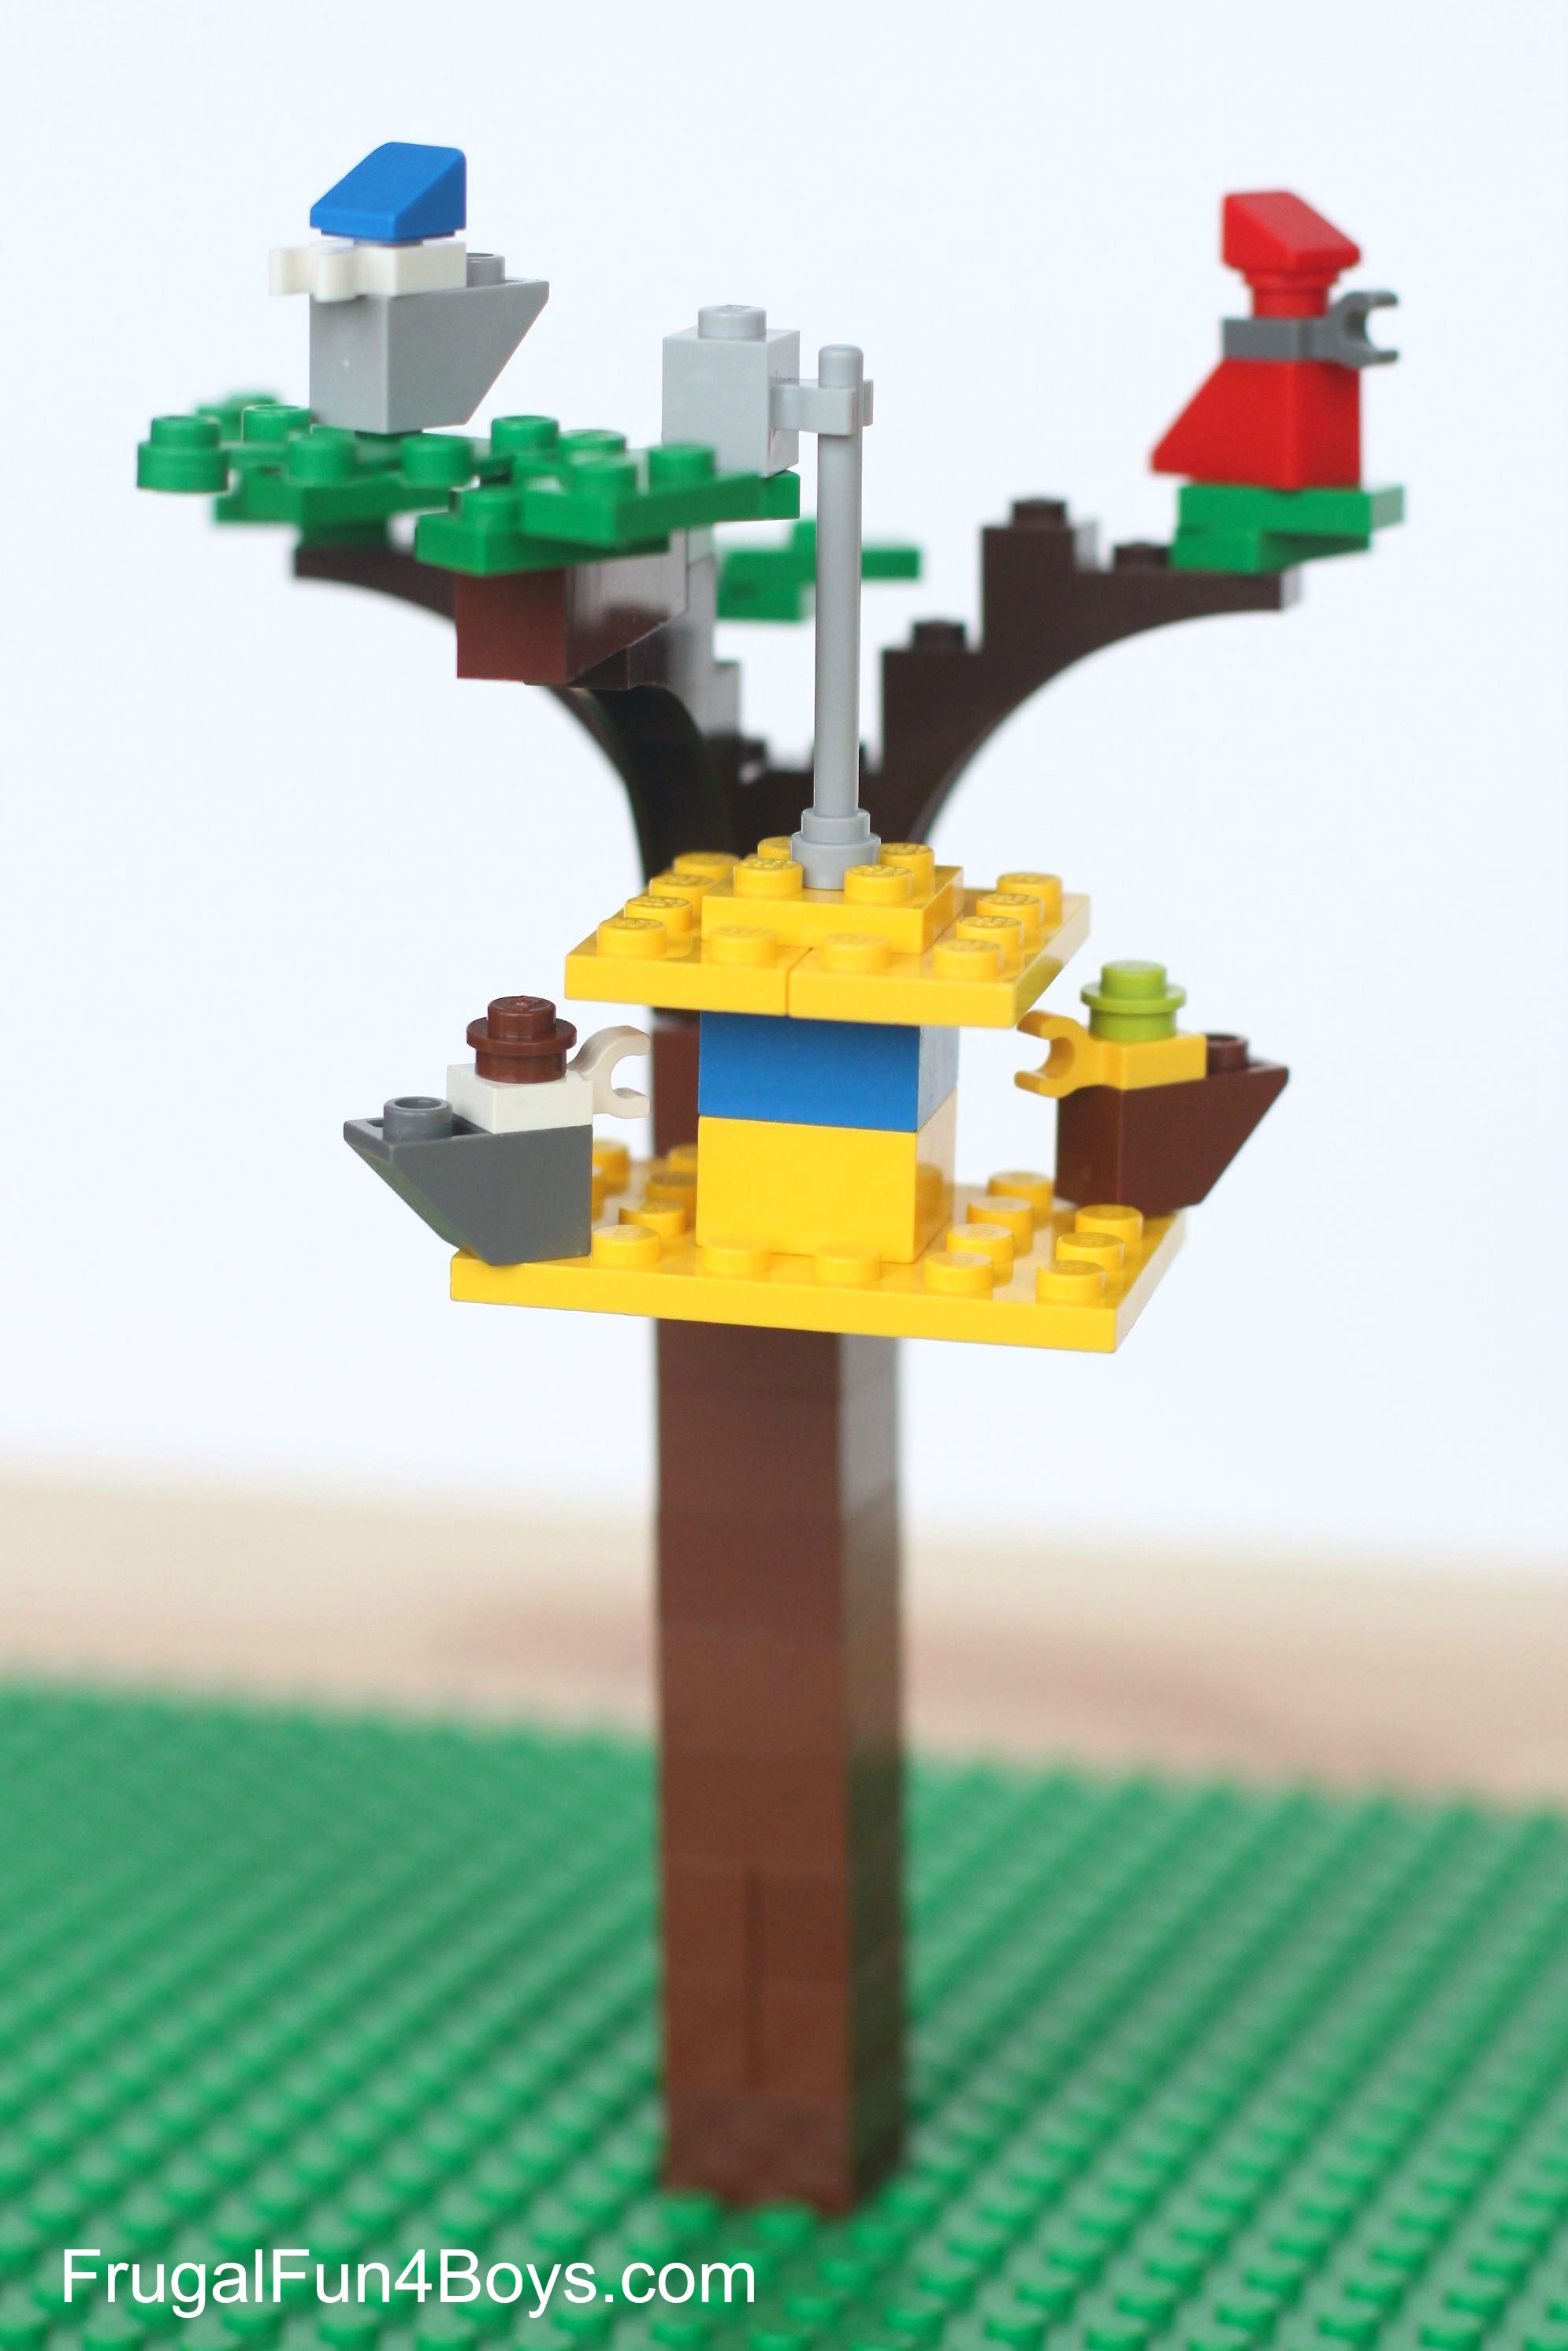 Six Spring Lego Projects to Build